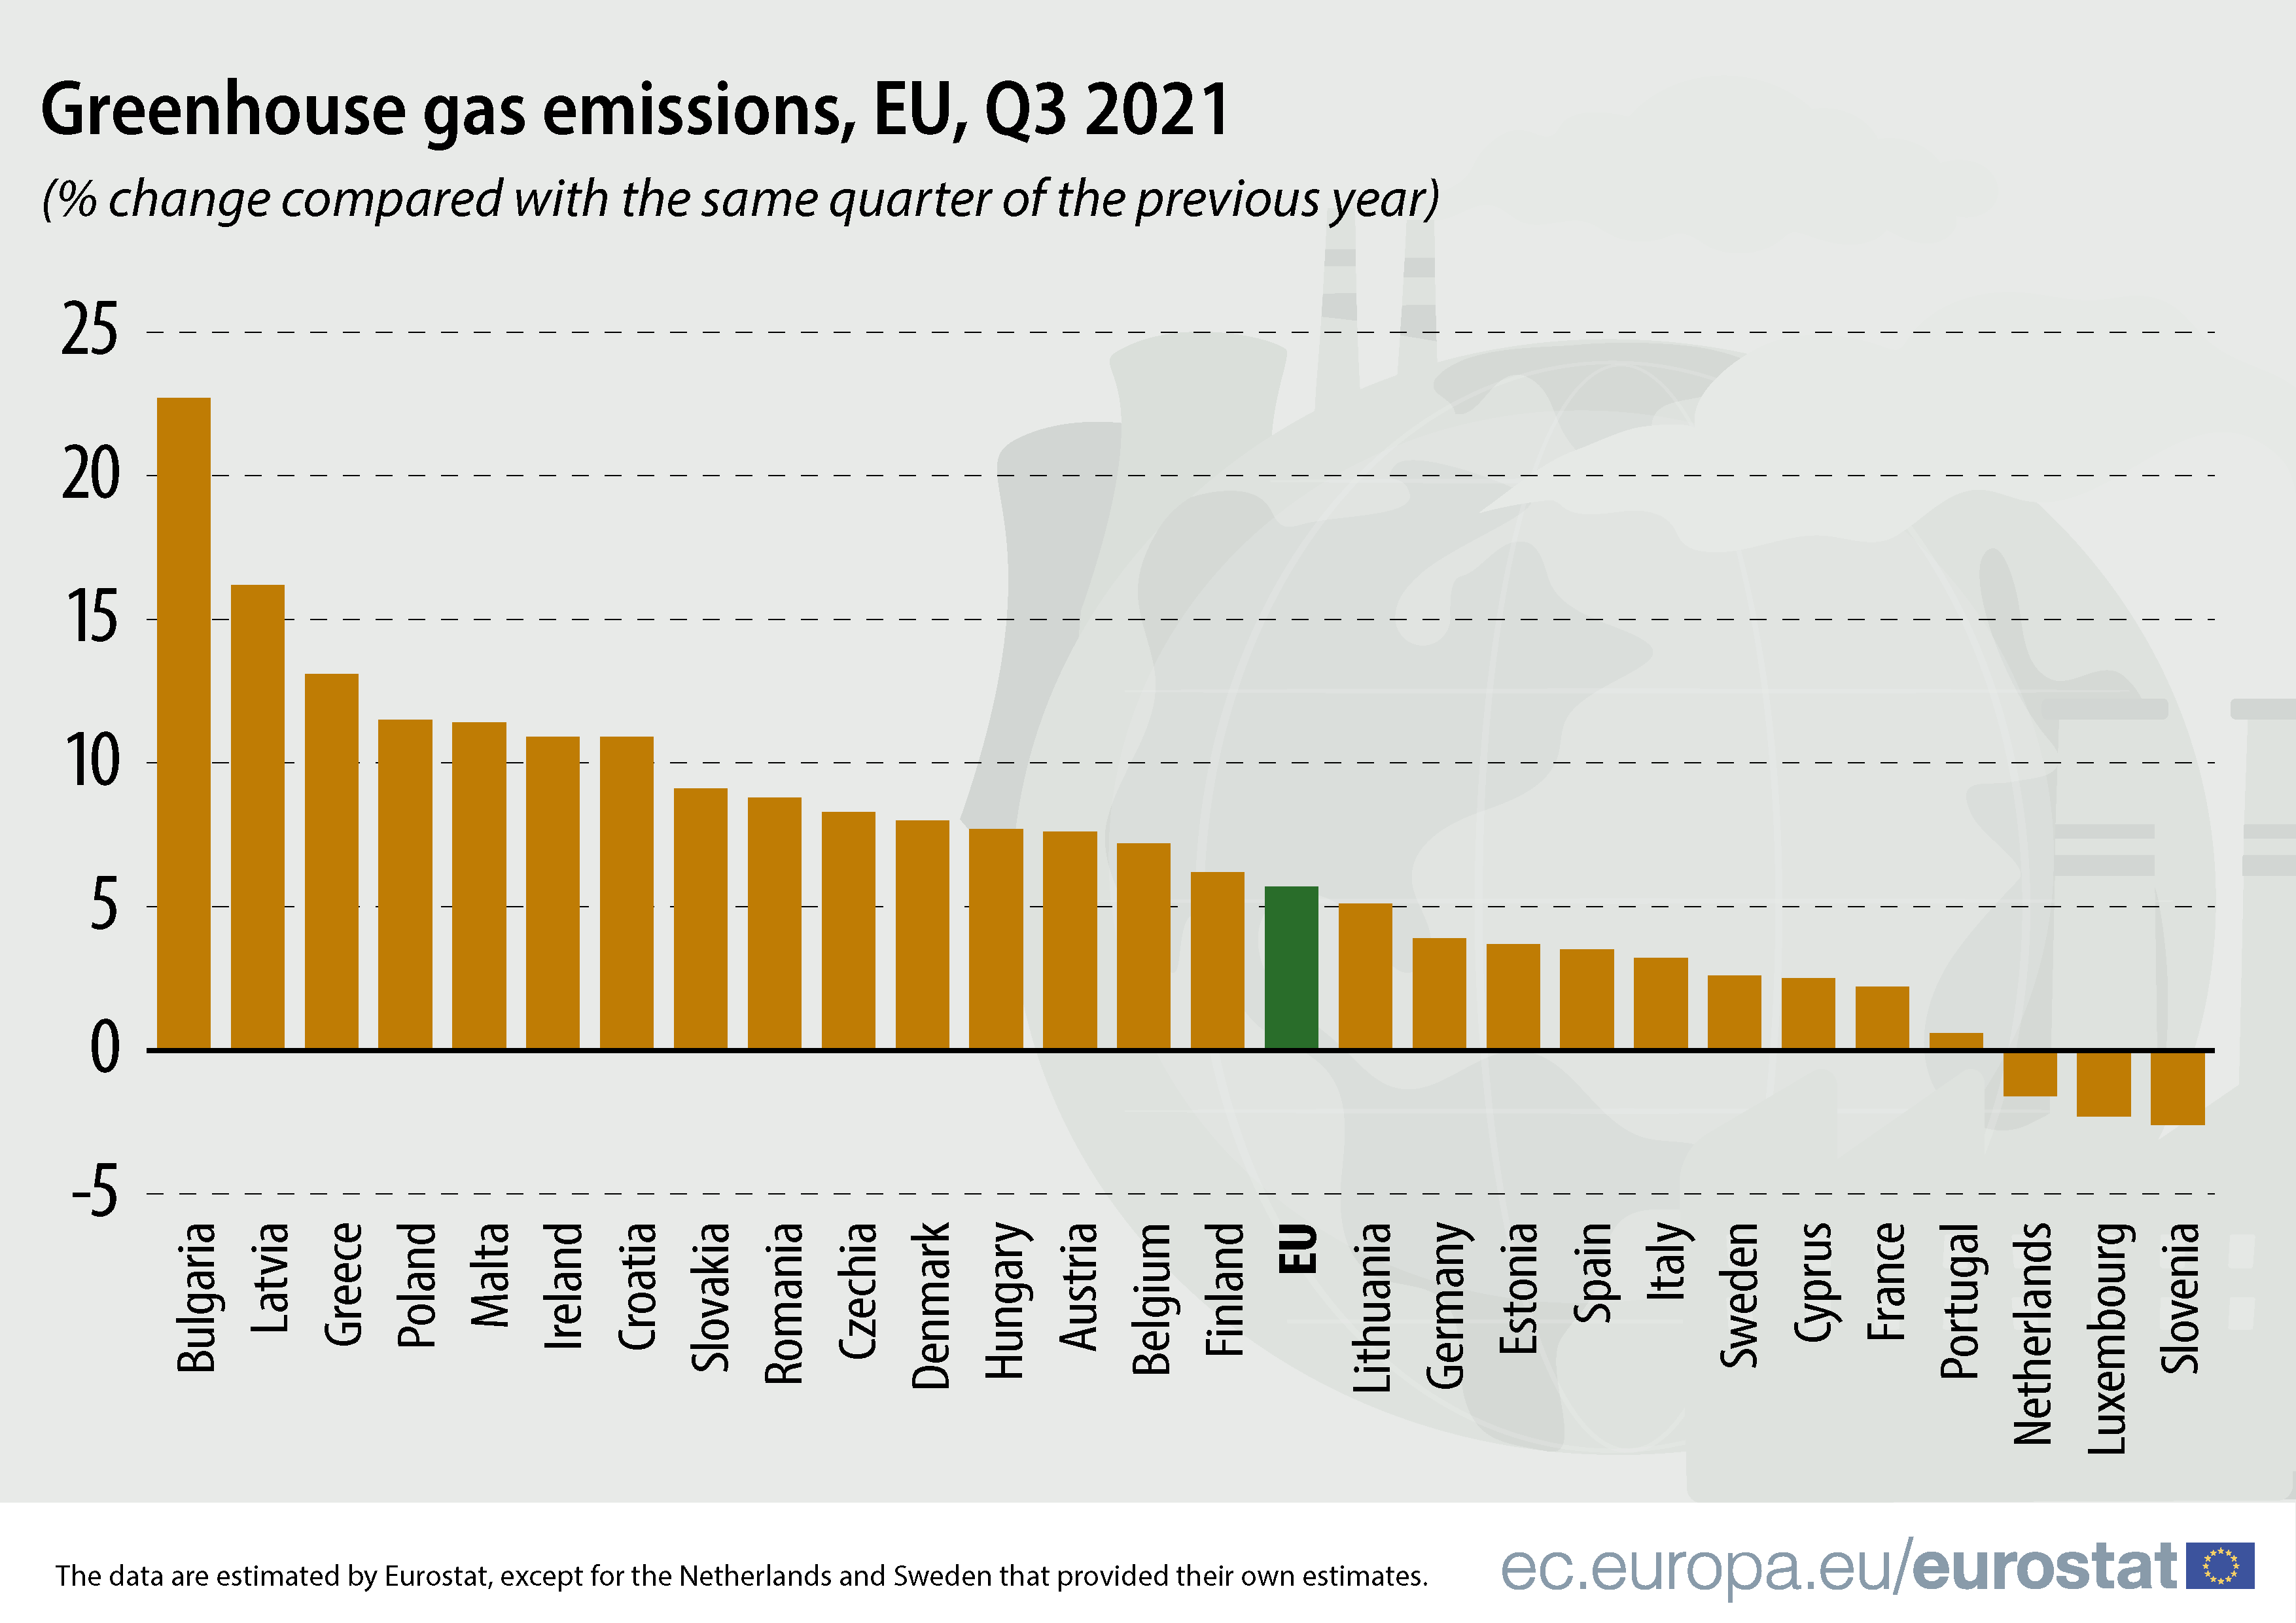 A vertical bar chart showing the greenhouse gas emissions of EU member states, with vertical country labels